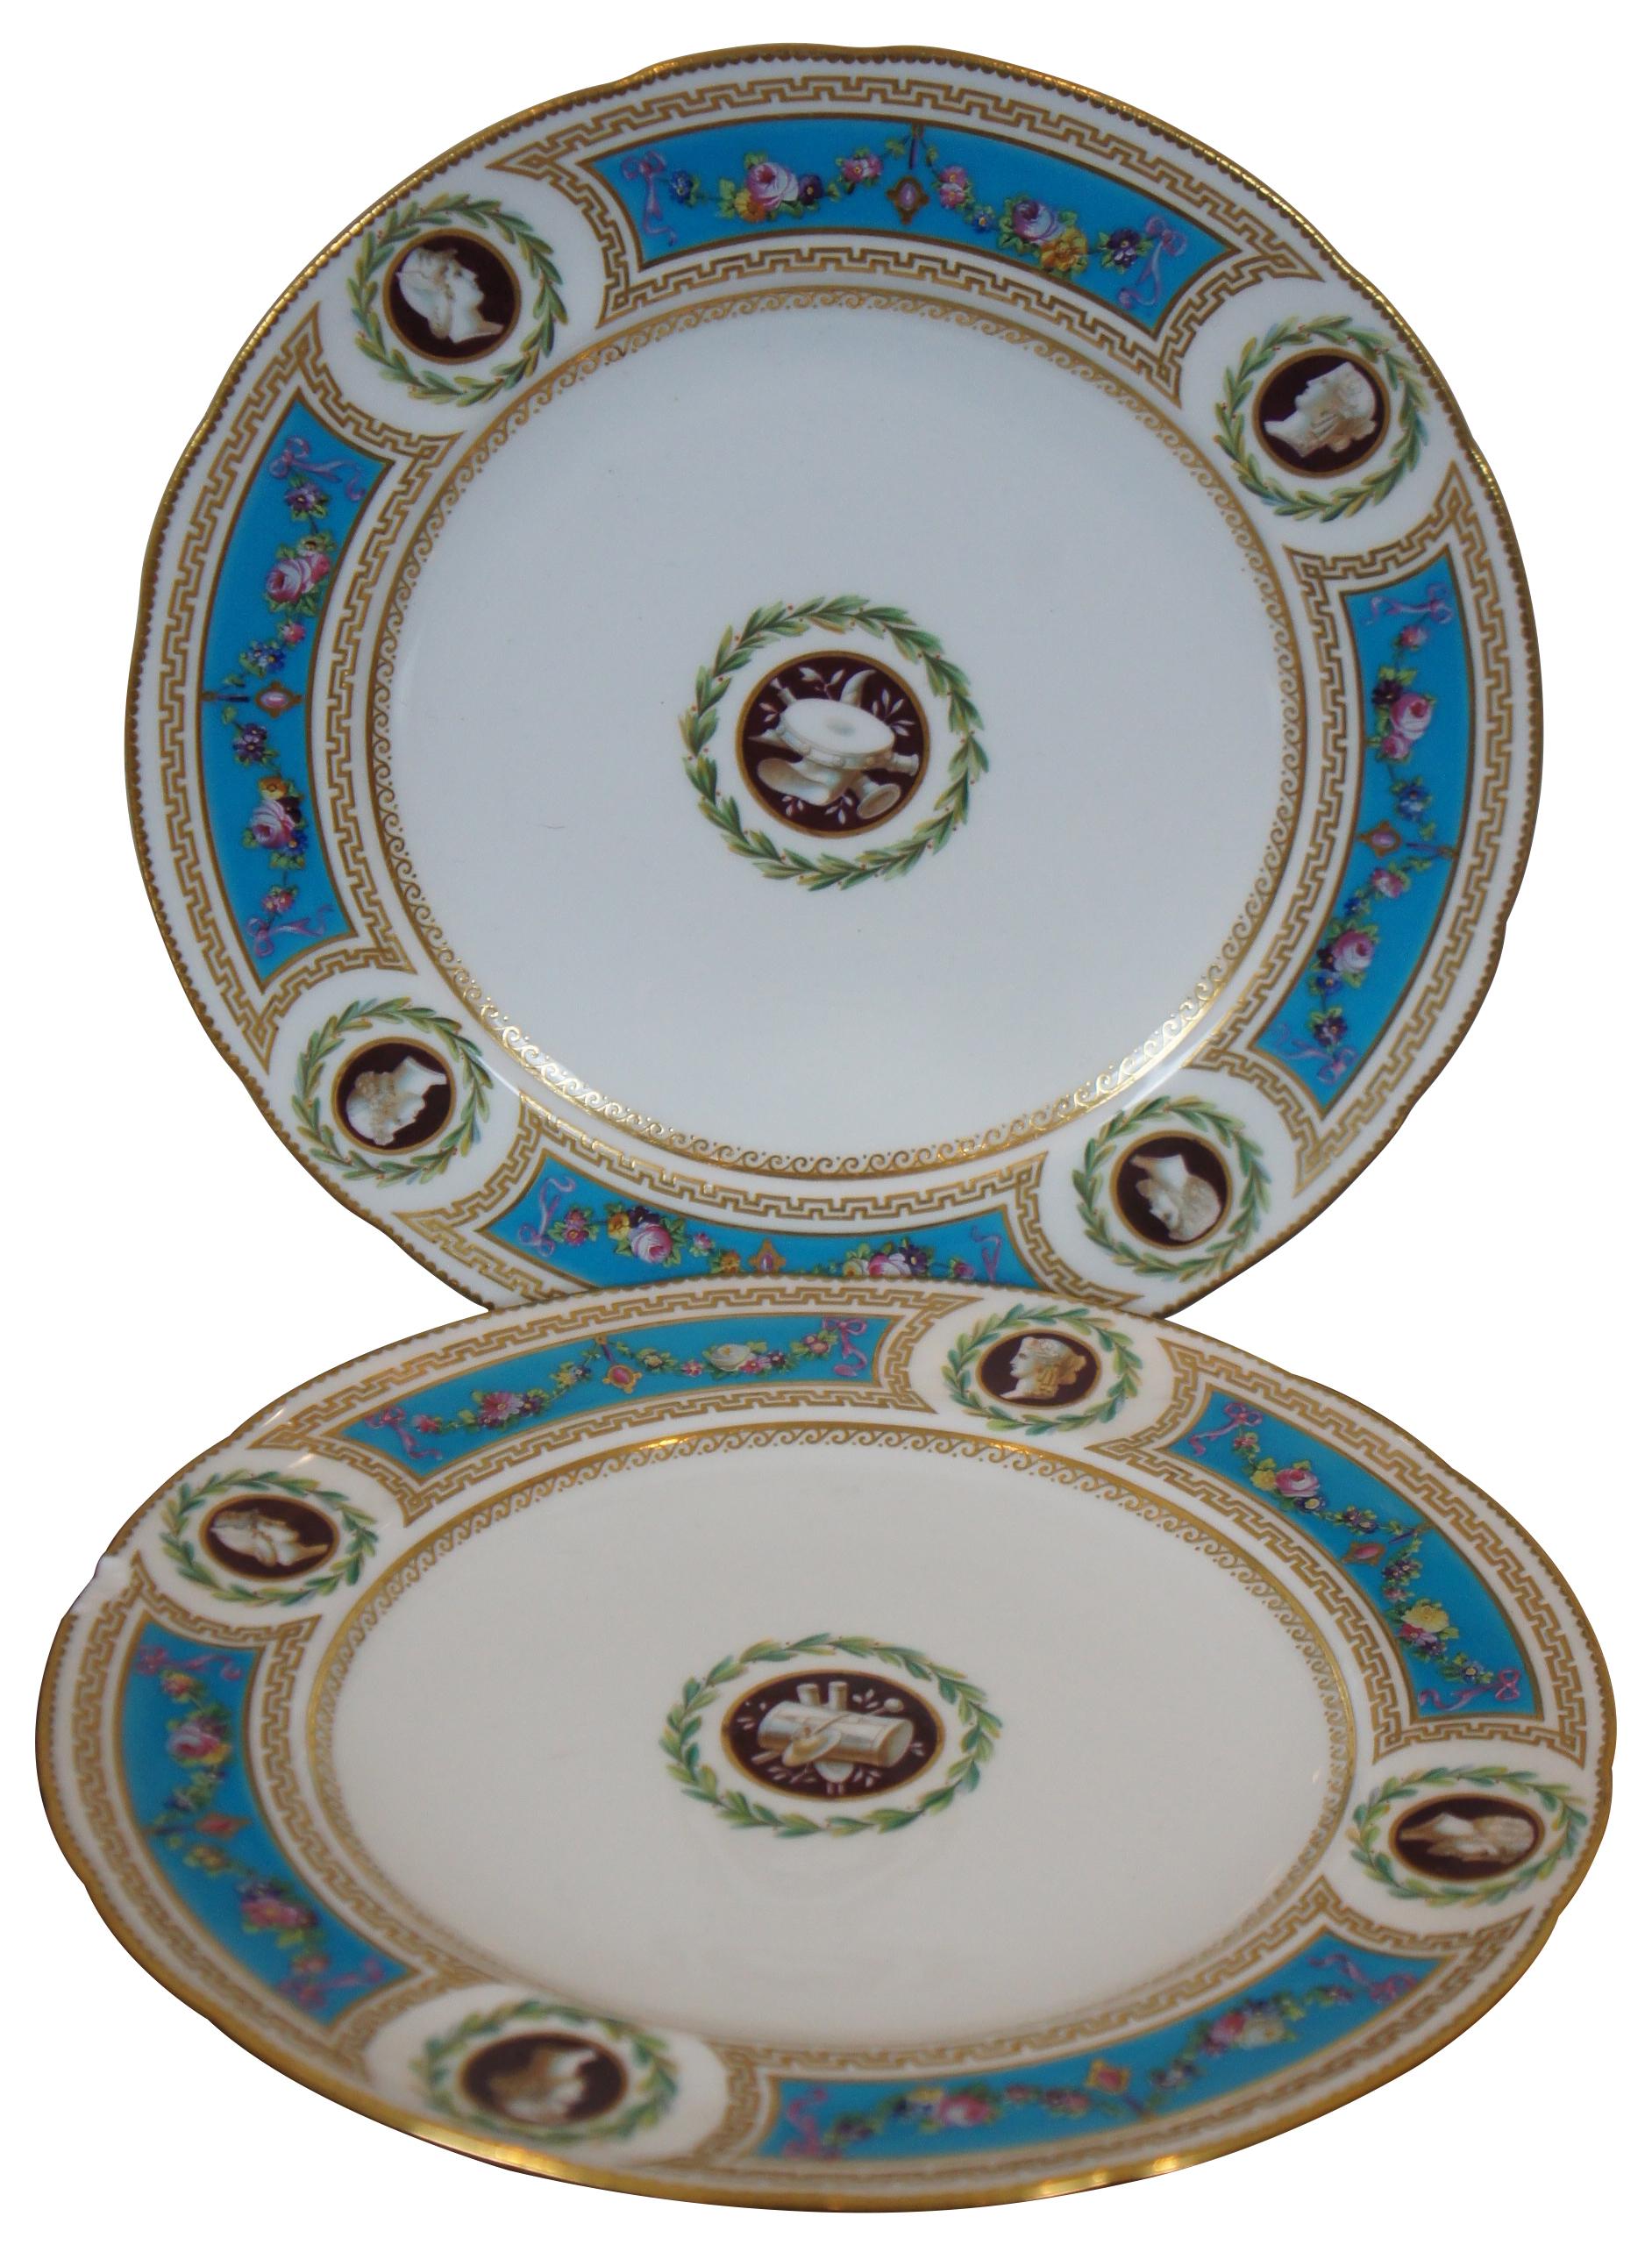 Pair of two Minton plates, circa 1862.

Provenance : Jerome Schottenstein Estate, Columbus Ohio. Jerome was was an American entrepreneur and philanthropist, co-founder of Schottenstein Stores Corp. The Schottenstein family were Lithuanian